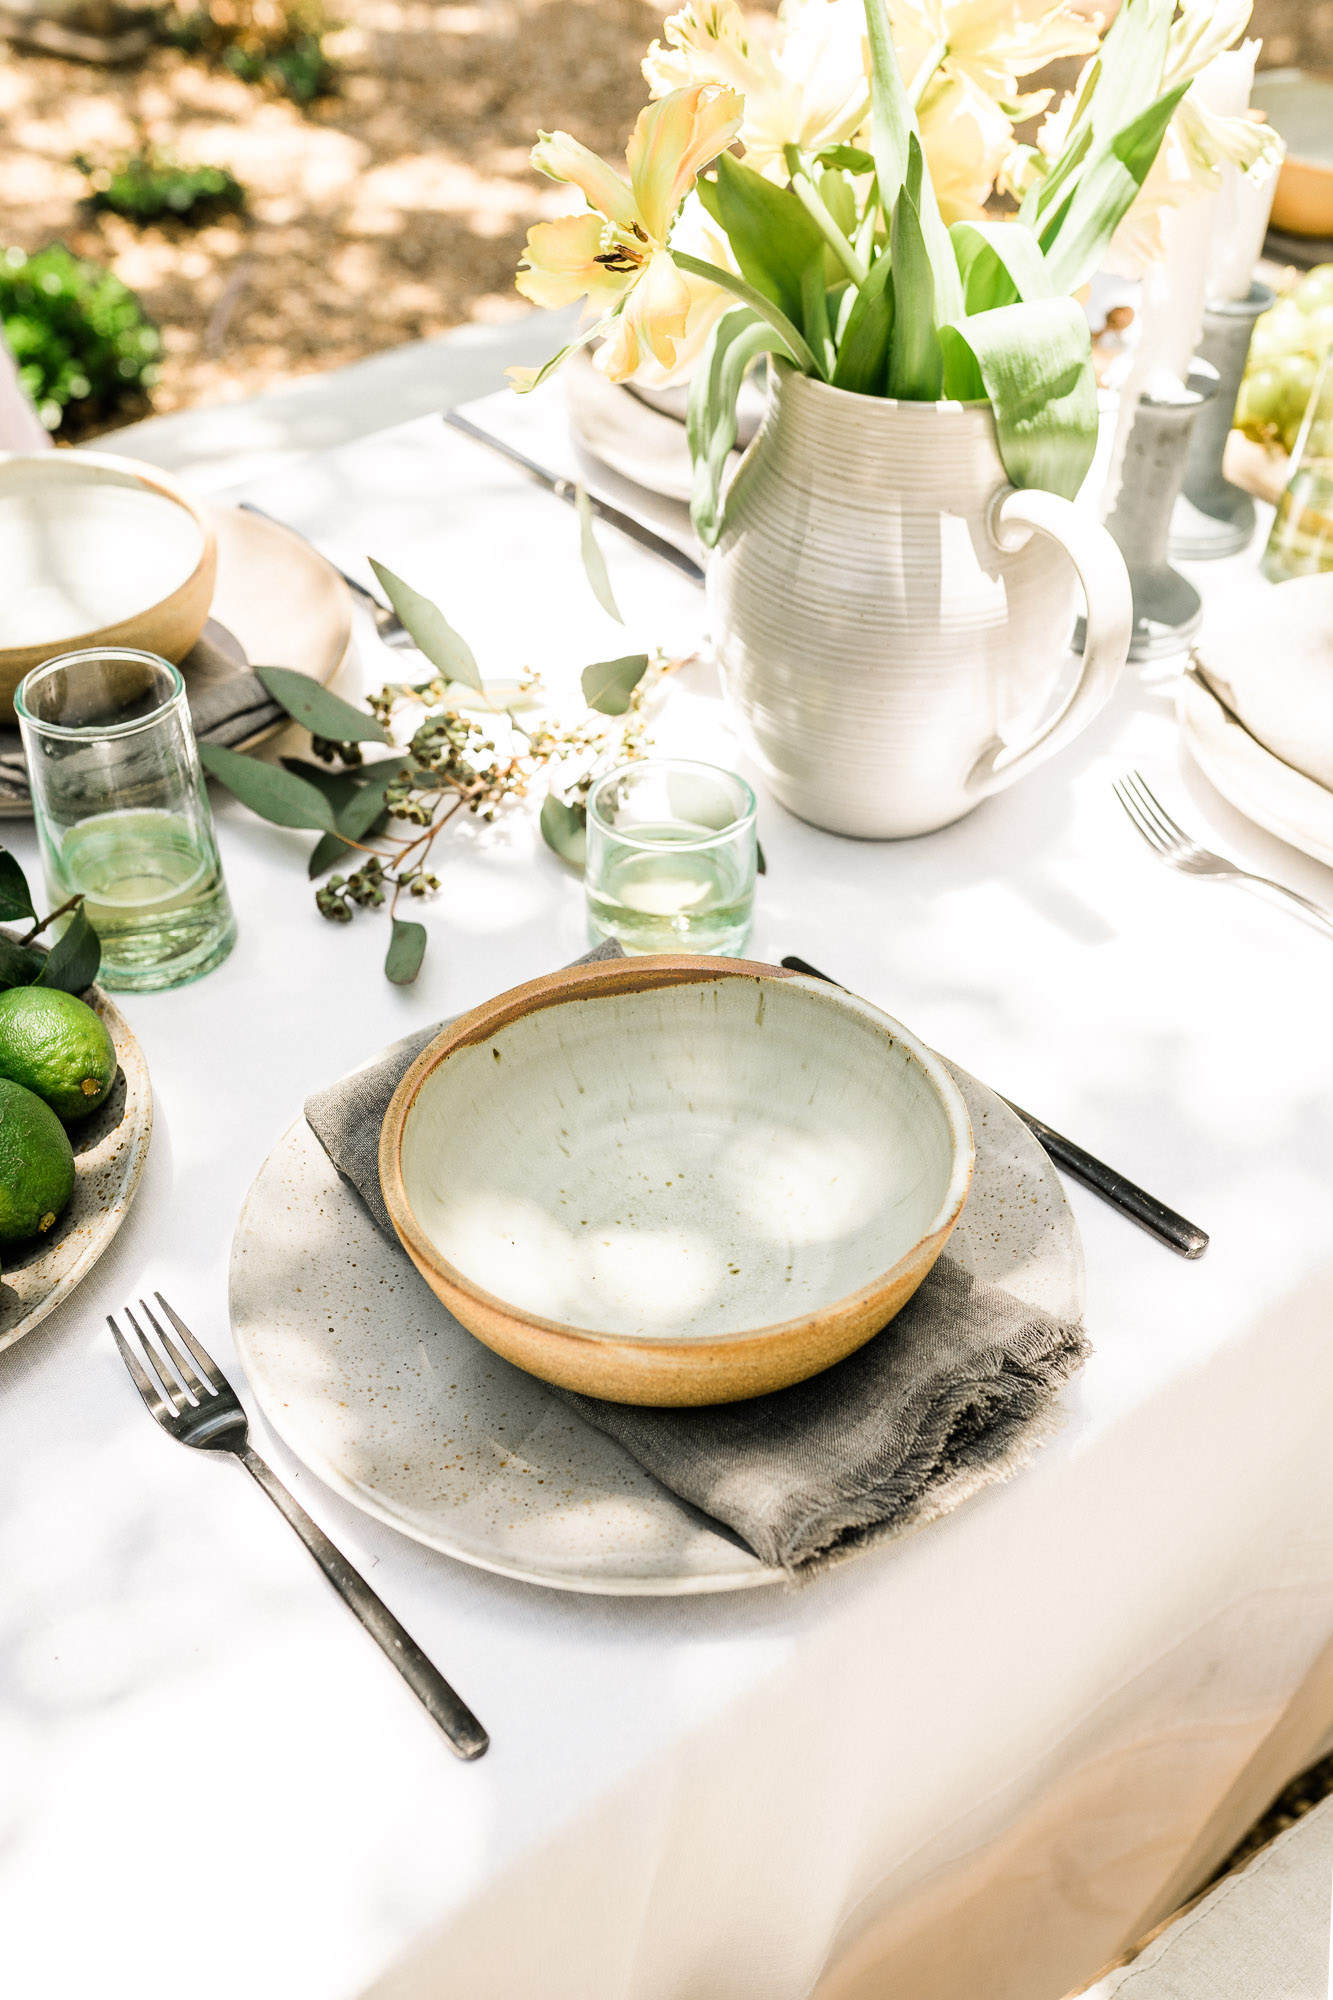 rustic place setting for a backyard dinner party with ceramic plates